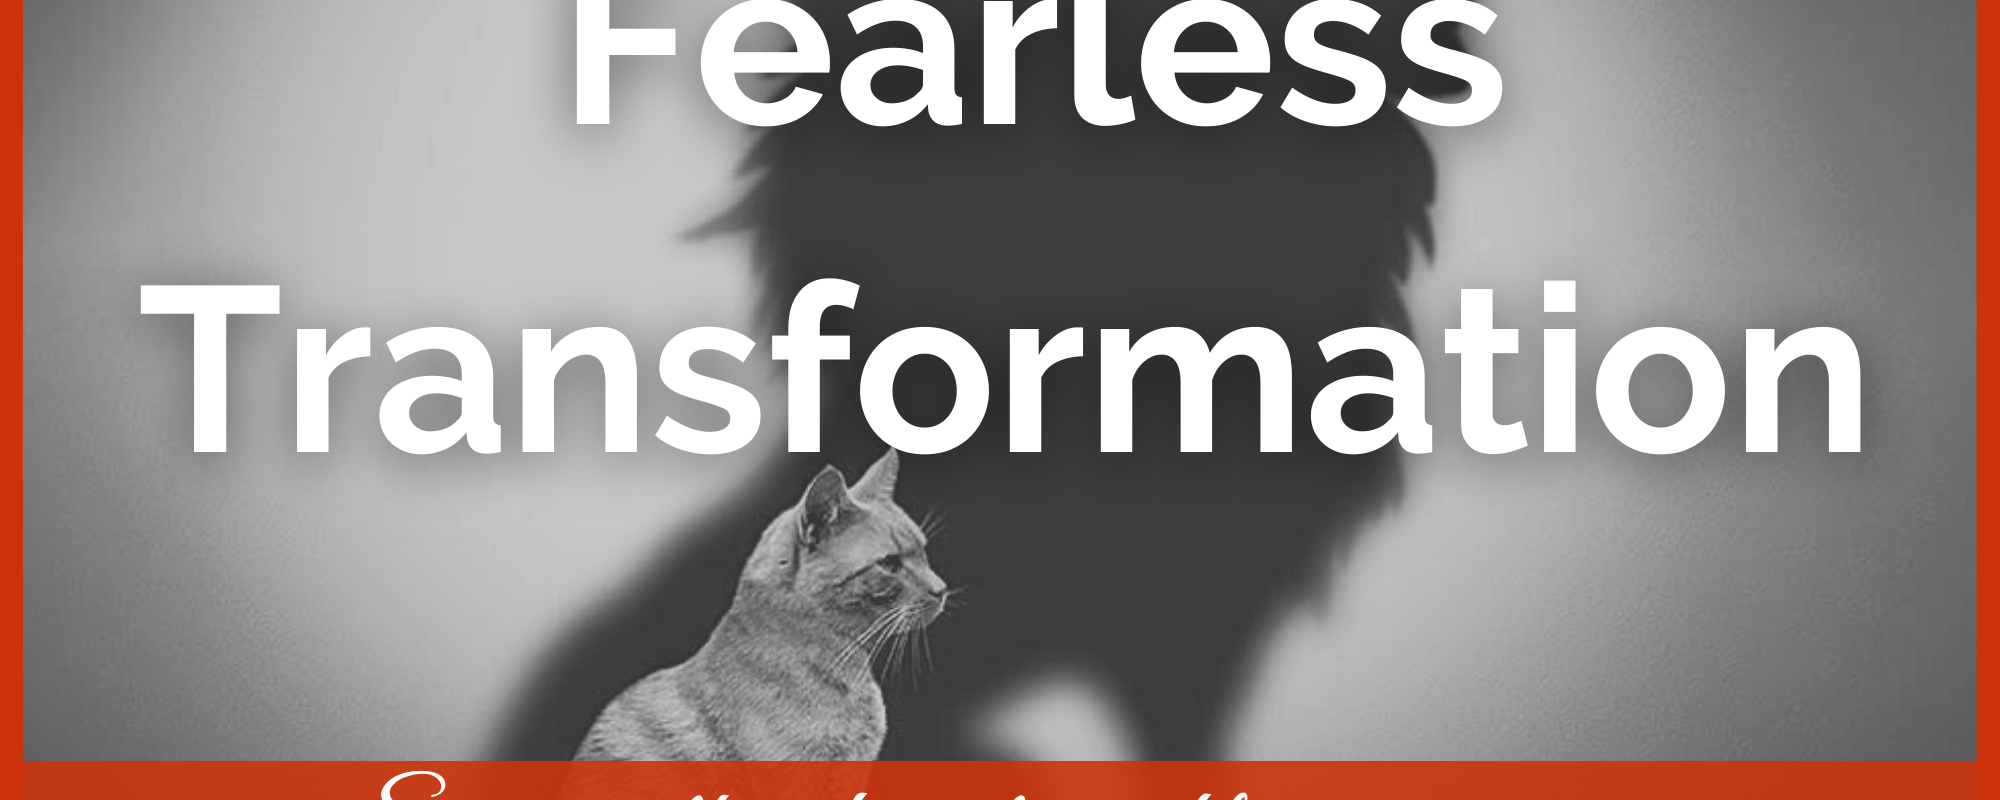 Fearless Transformation